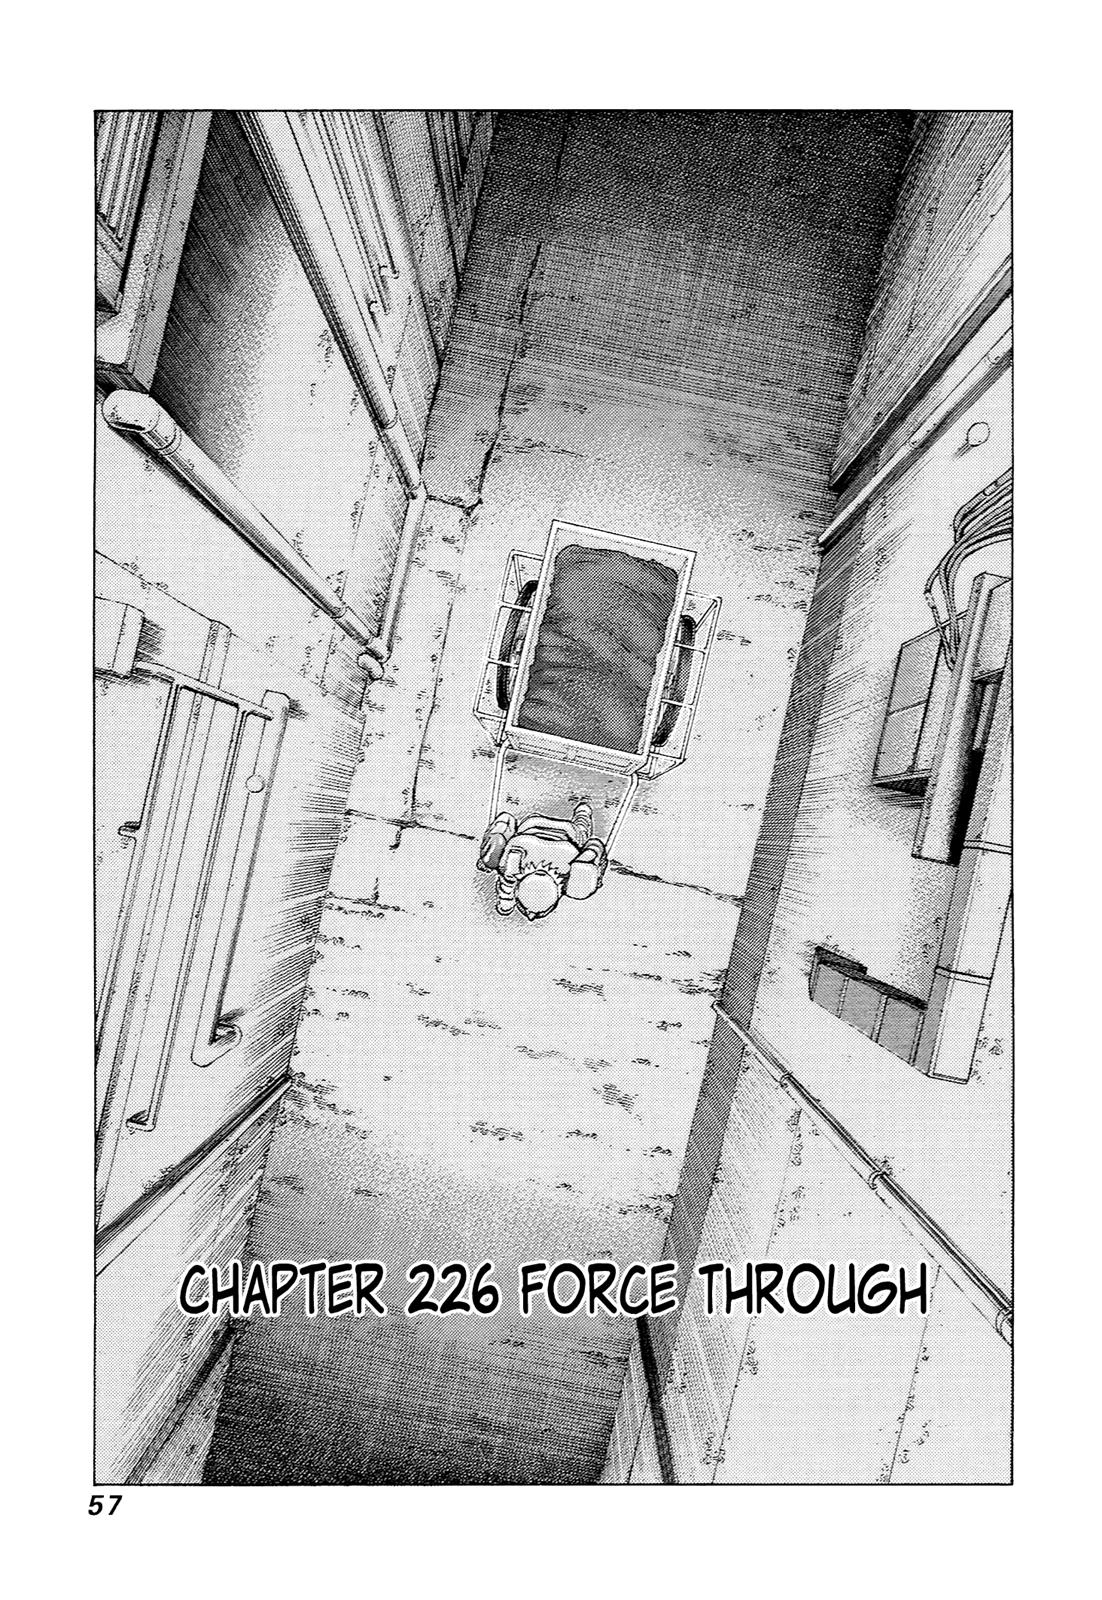 81 Diver Chapter 226 #1